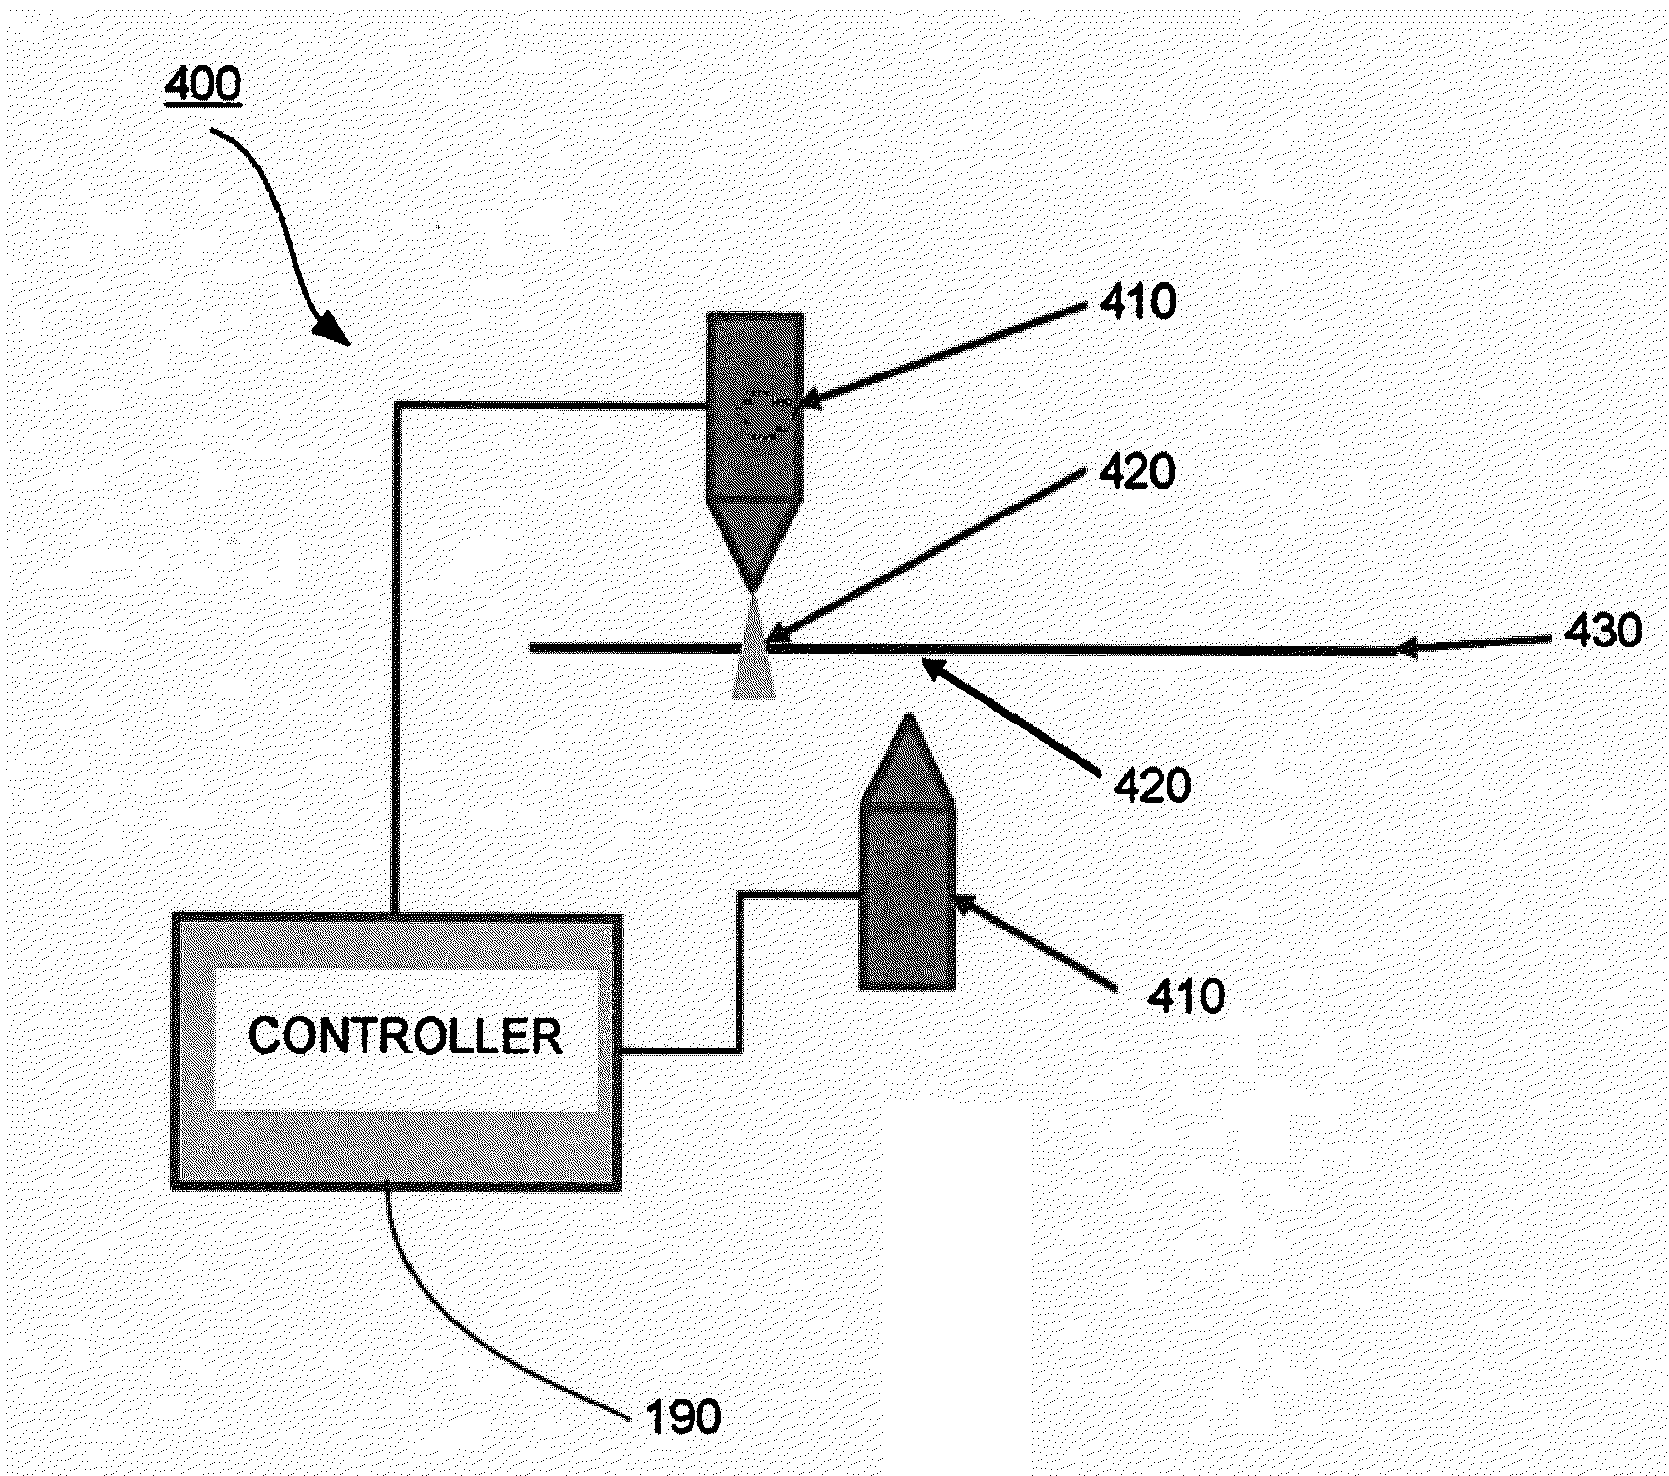 System and method for surface treatment and barrier coating of fibers for in situ cnt growth